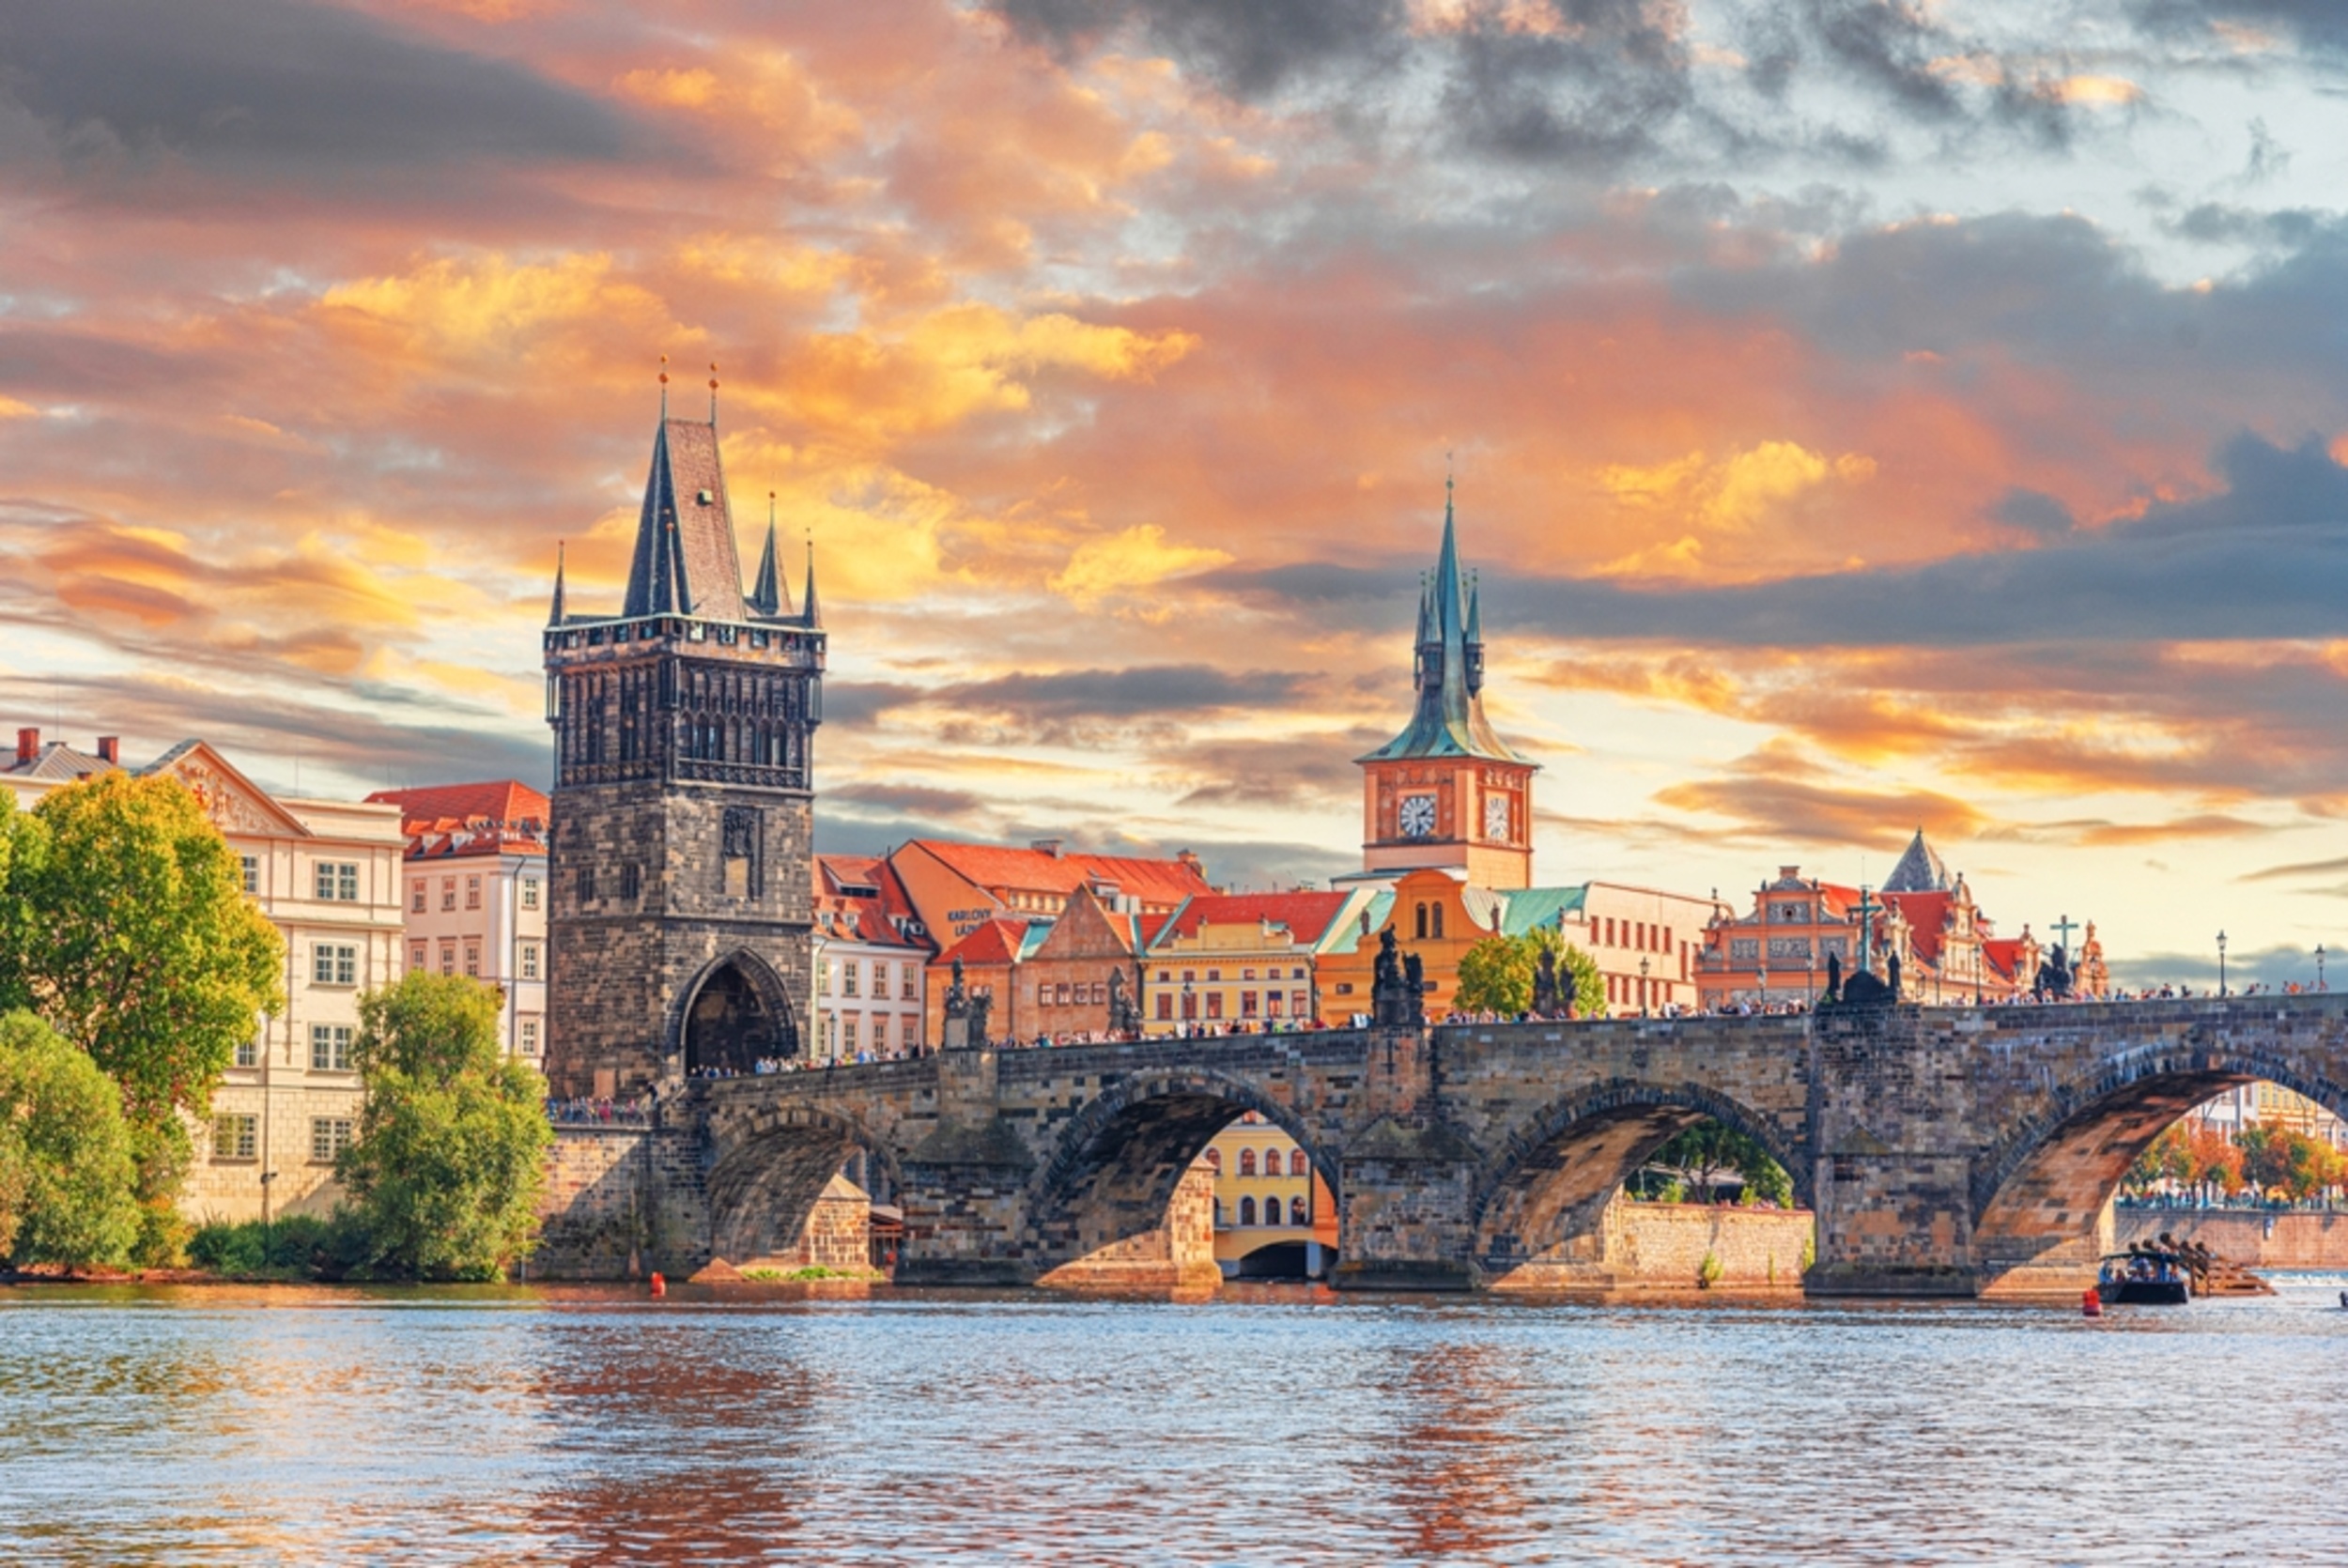 <p>Considered by many to be one of Europe's most beautiful cities, Prague is an architecture lover's dream. It's positively packed with stunning Gothic cathedrals, historic museums, and of course, the oft-visited Prague Castle. </p><p><a href='https://www.msn.com/en-us/community/channel/vid-cj9pqbr0vn9in2b6ddcd8sfgpfq6x6utp44fssrv6mc2gtybw0us'>Follow us on MSN to see more of our exclusive lifestyle content.</a></p>